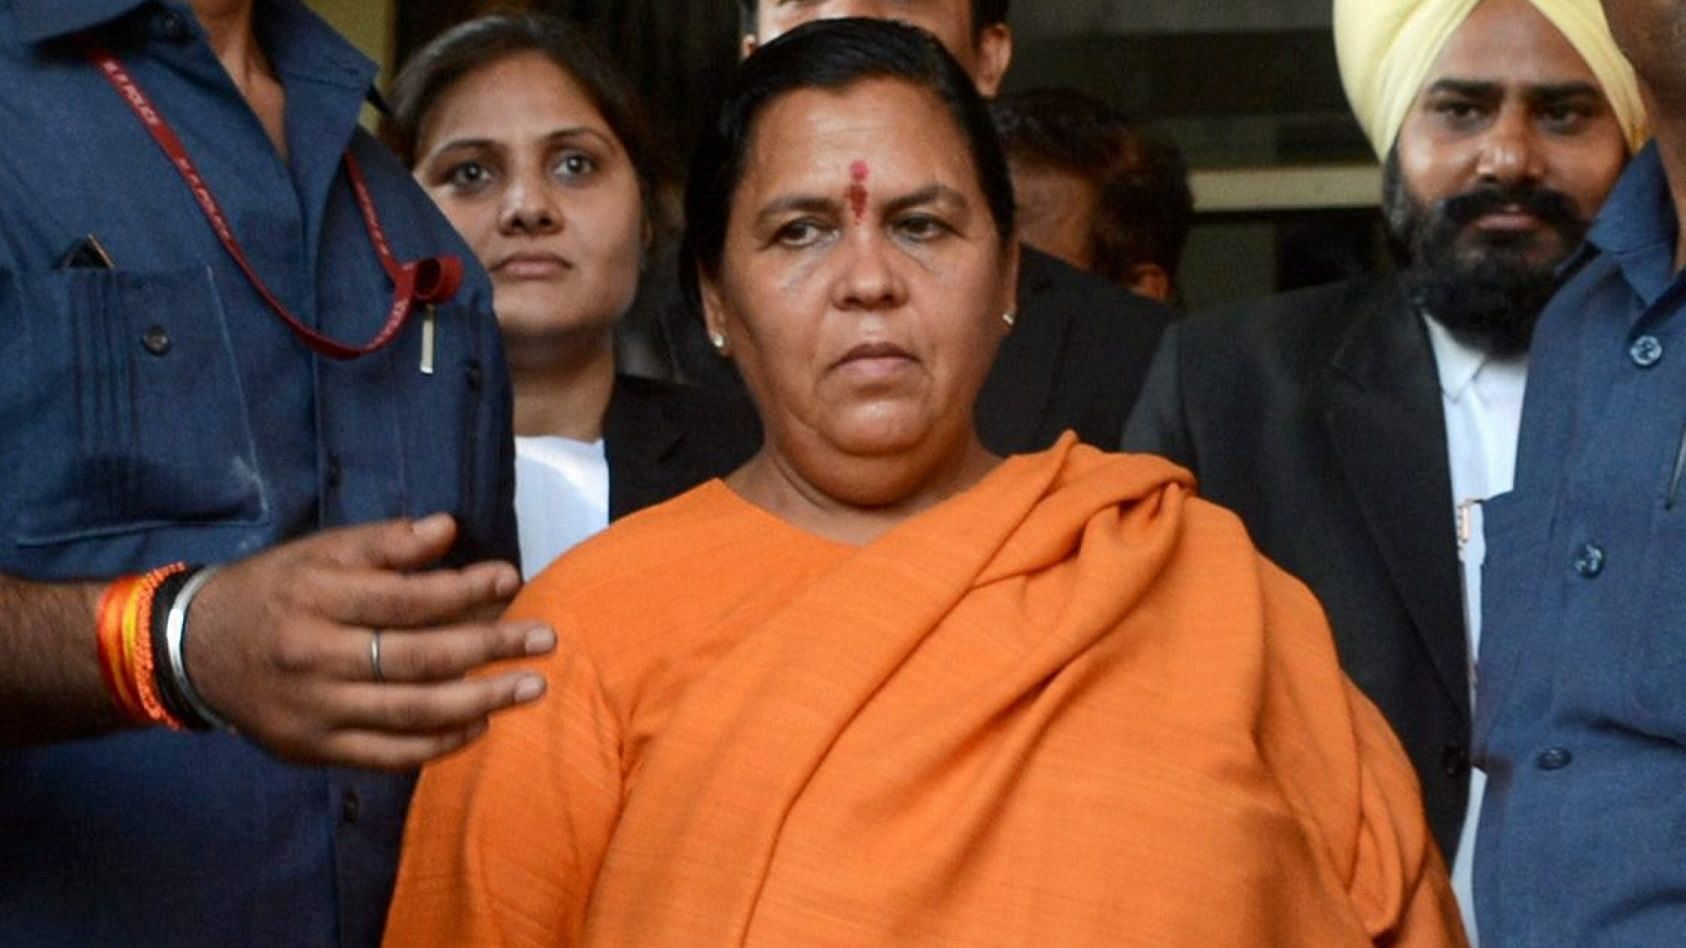 BJP senior leader Uma Bharti, one of the accused in the Babri Masjid demolition case, coming out after appearing before a Special CBI court in Lucknow on Tuesday.